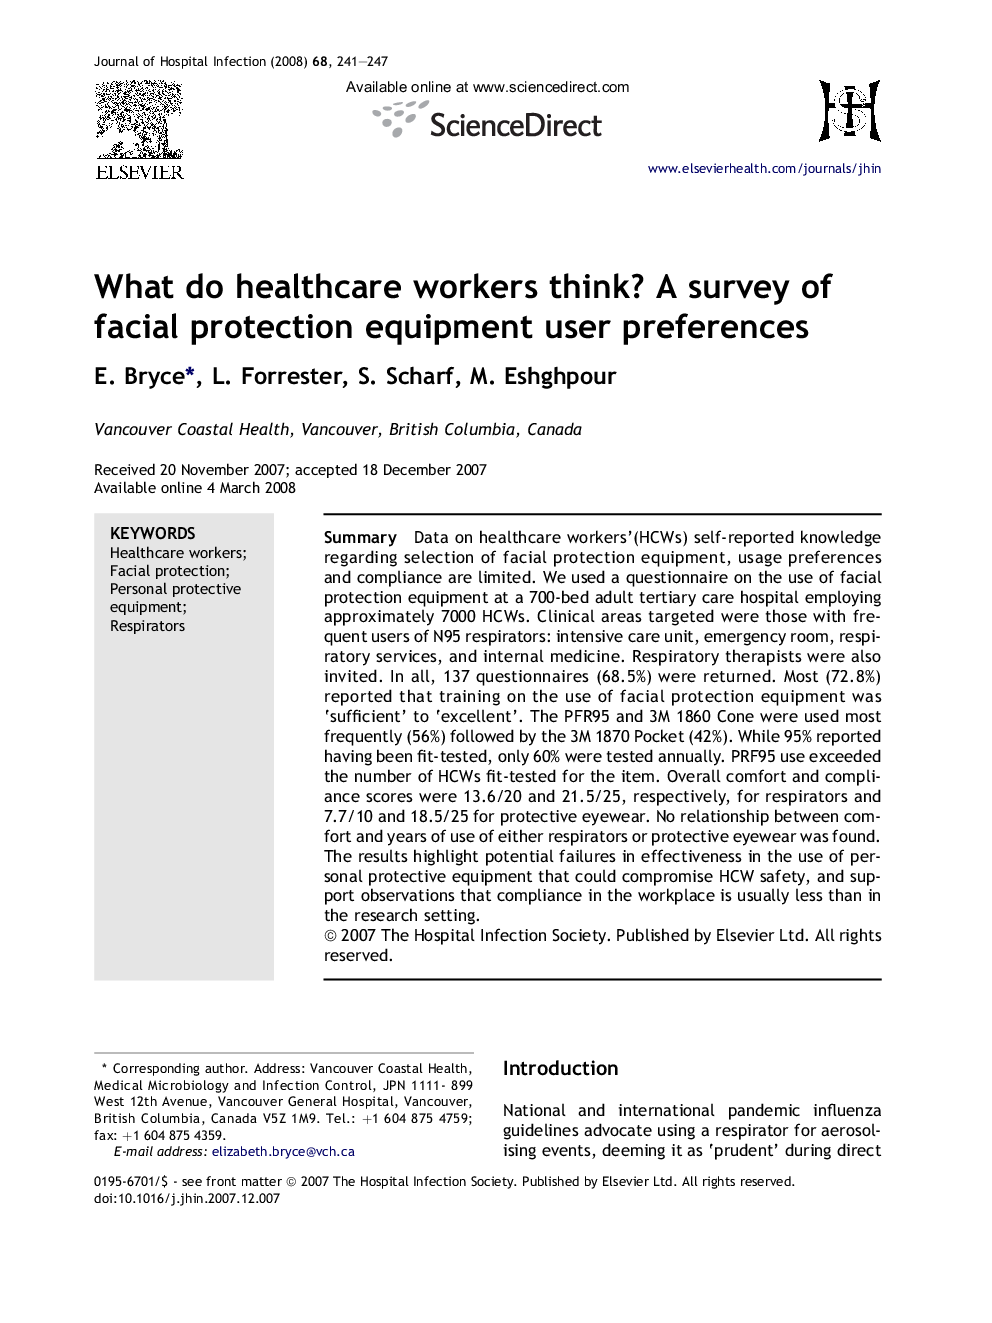 What do healthcare workers think? A survey of facial protection equipment user preferences